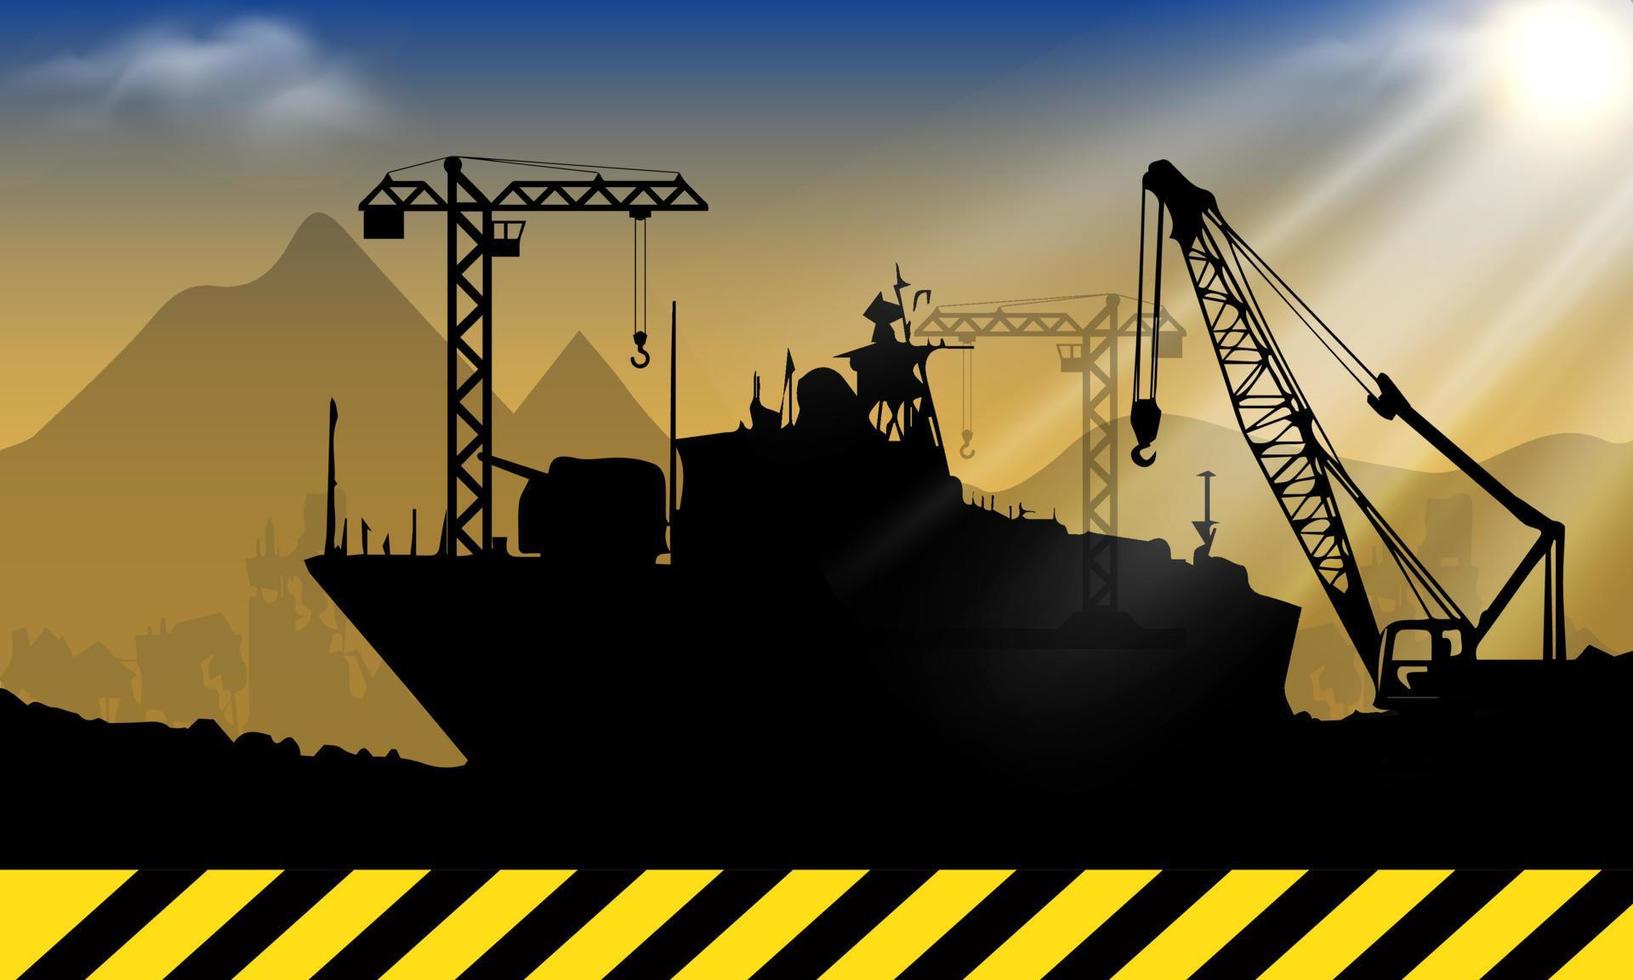 ship under construction background with sunset and mountain silhouette. under construction design vector illustration